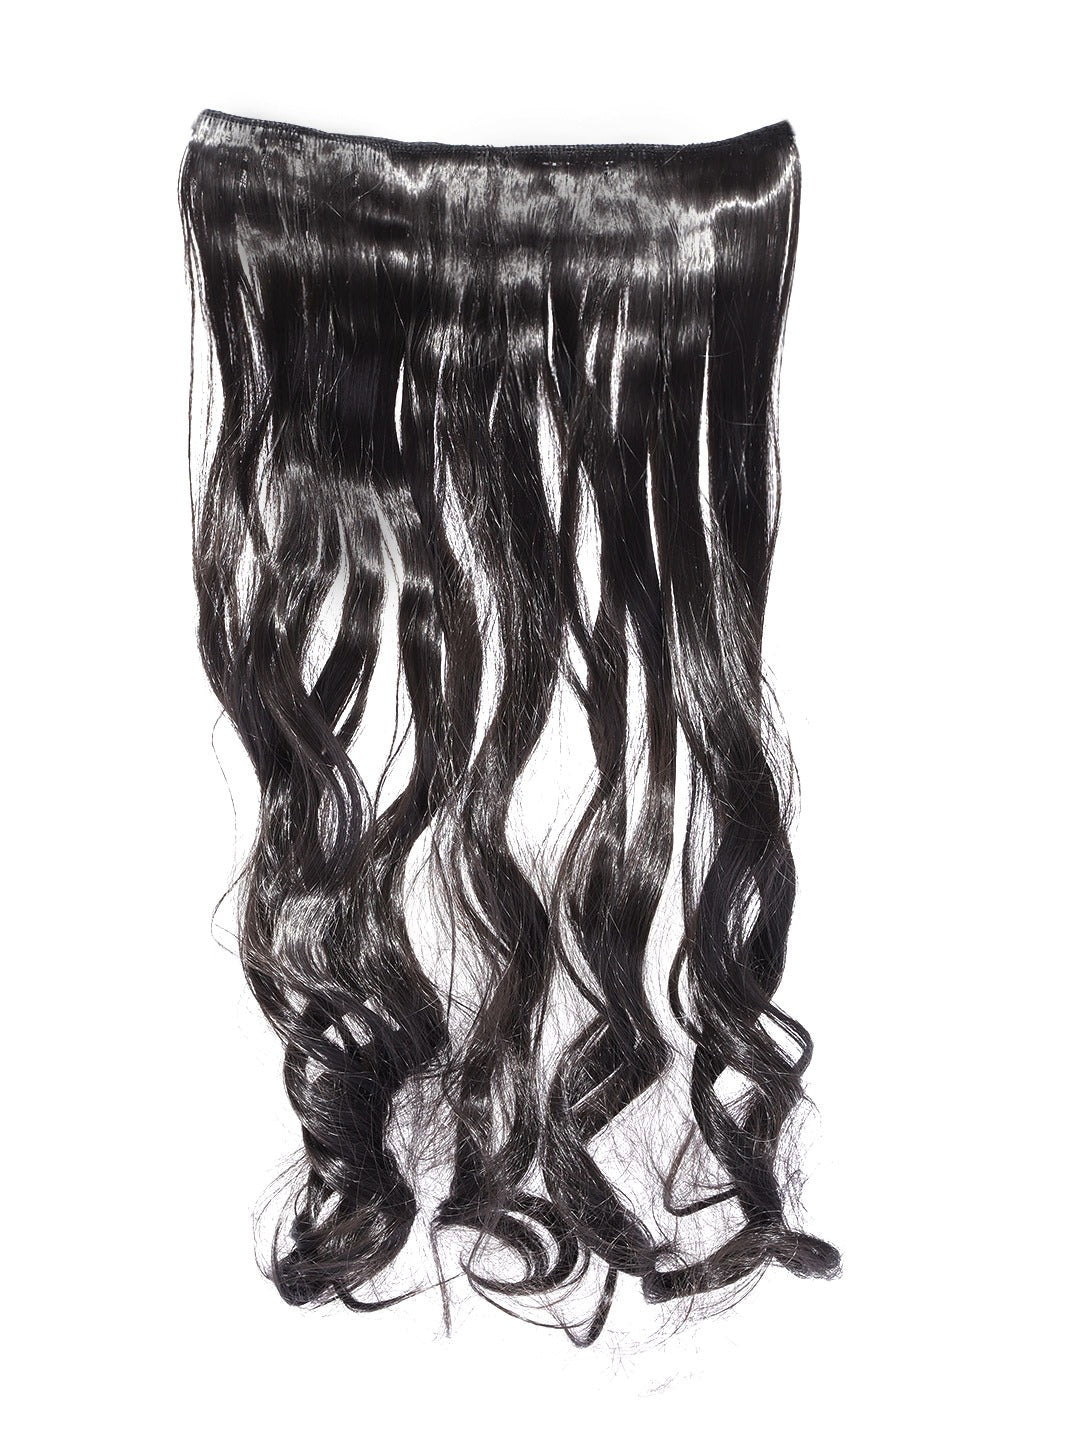 Blueberry brown Curly/Wavy Hair Extension with 5 clips